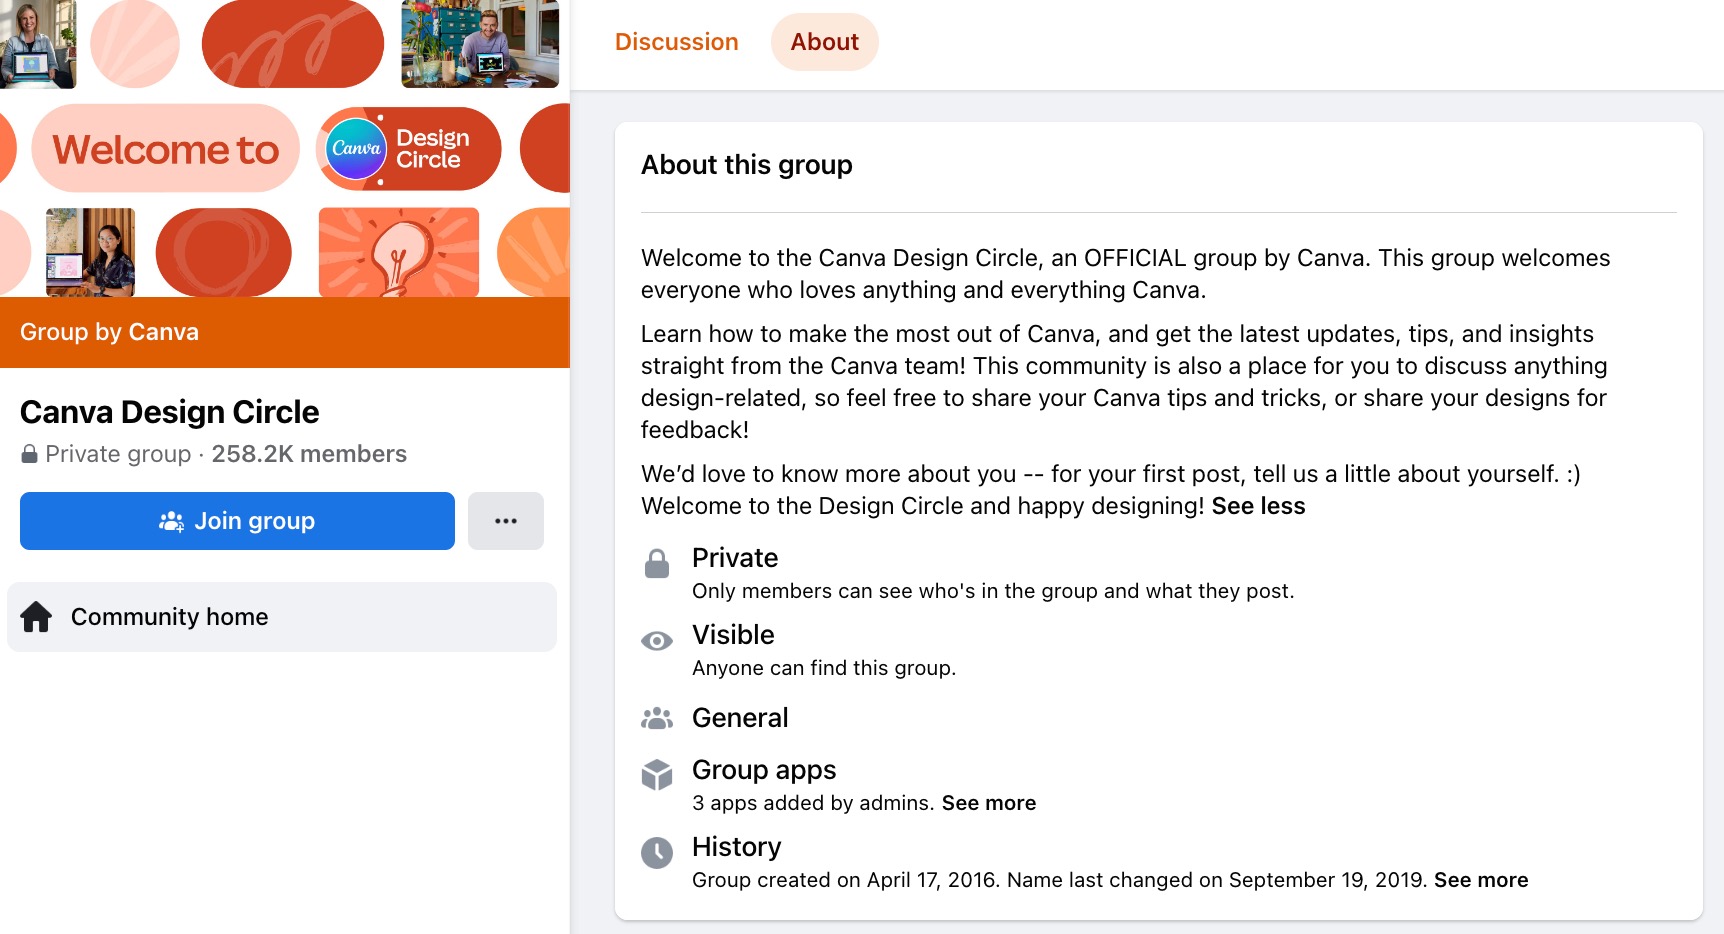 A screenshot of the Canva Design Circle Facebook group with the "About" tab open. Their “About” section describes the group's purpose and rules. 